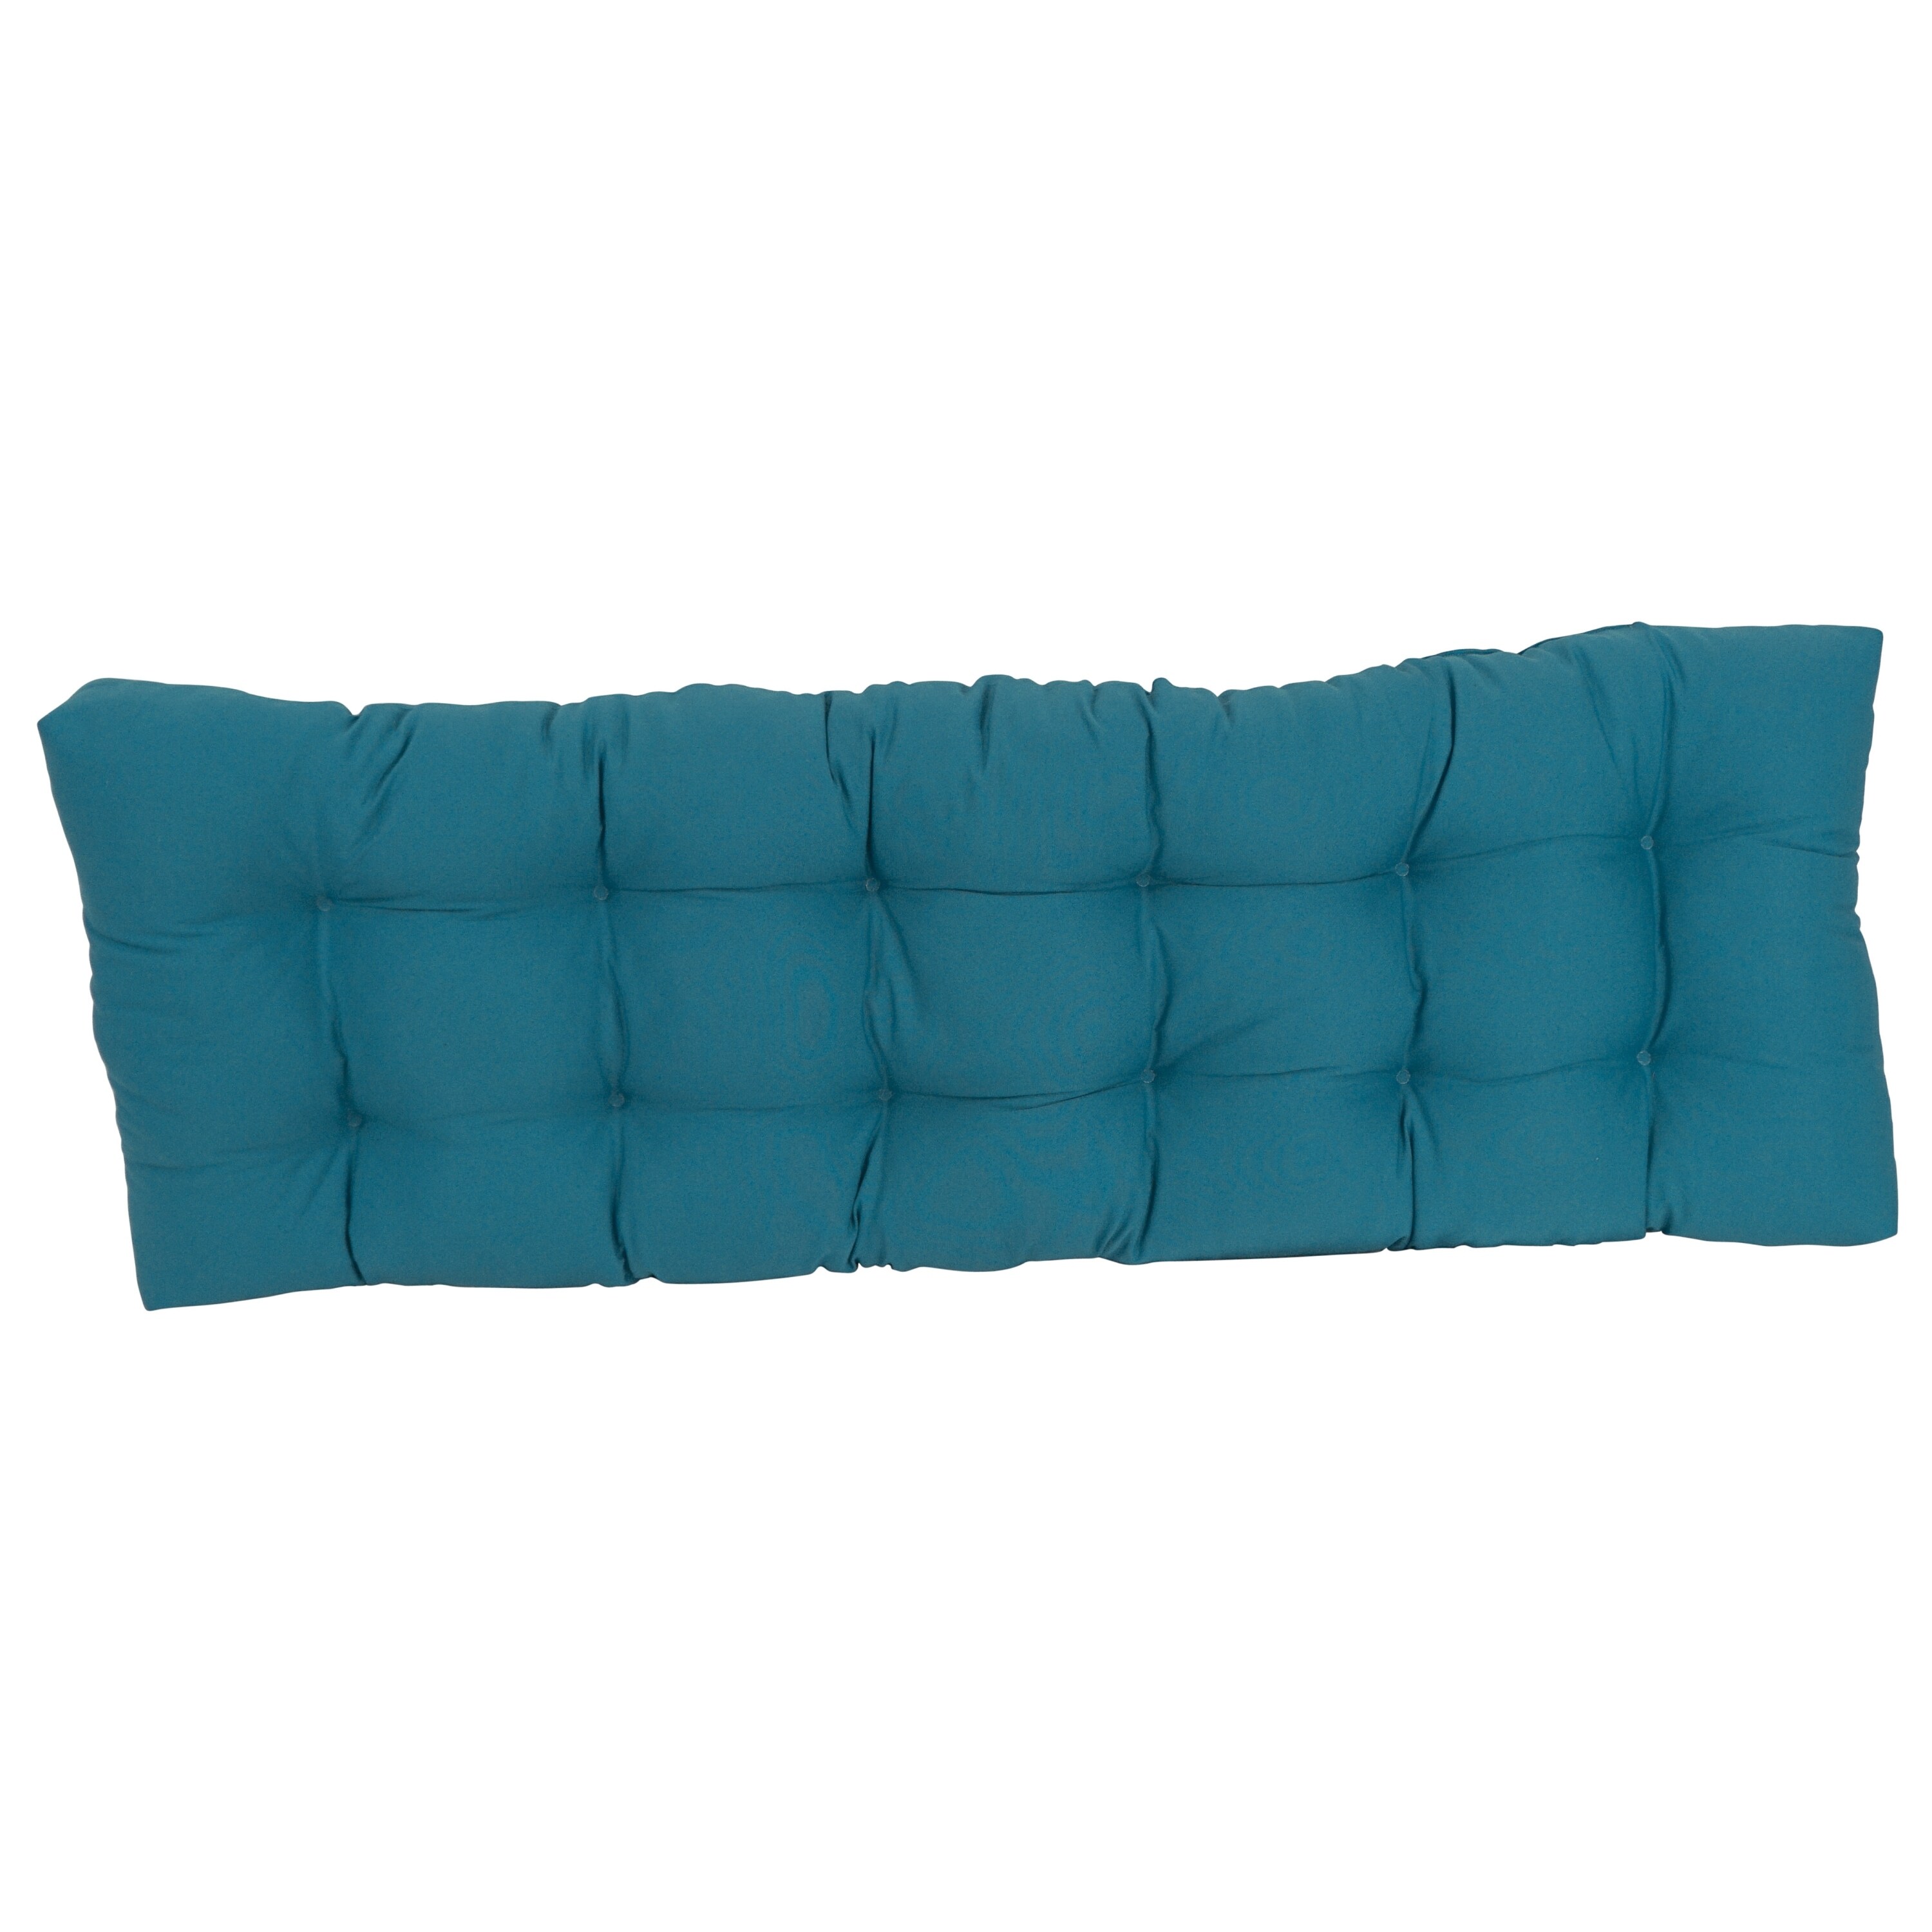 https://ak1.ostkcdn.com/images/products/is/images/direct/1f952a19619dc567babeab06c9b1ca995b340946/Solid-Twill-Tufted-Indoor-Bench-Cushion-%28Multiple-widths-from-42-to-60-inch%29.jpg